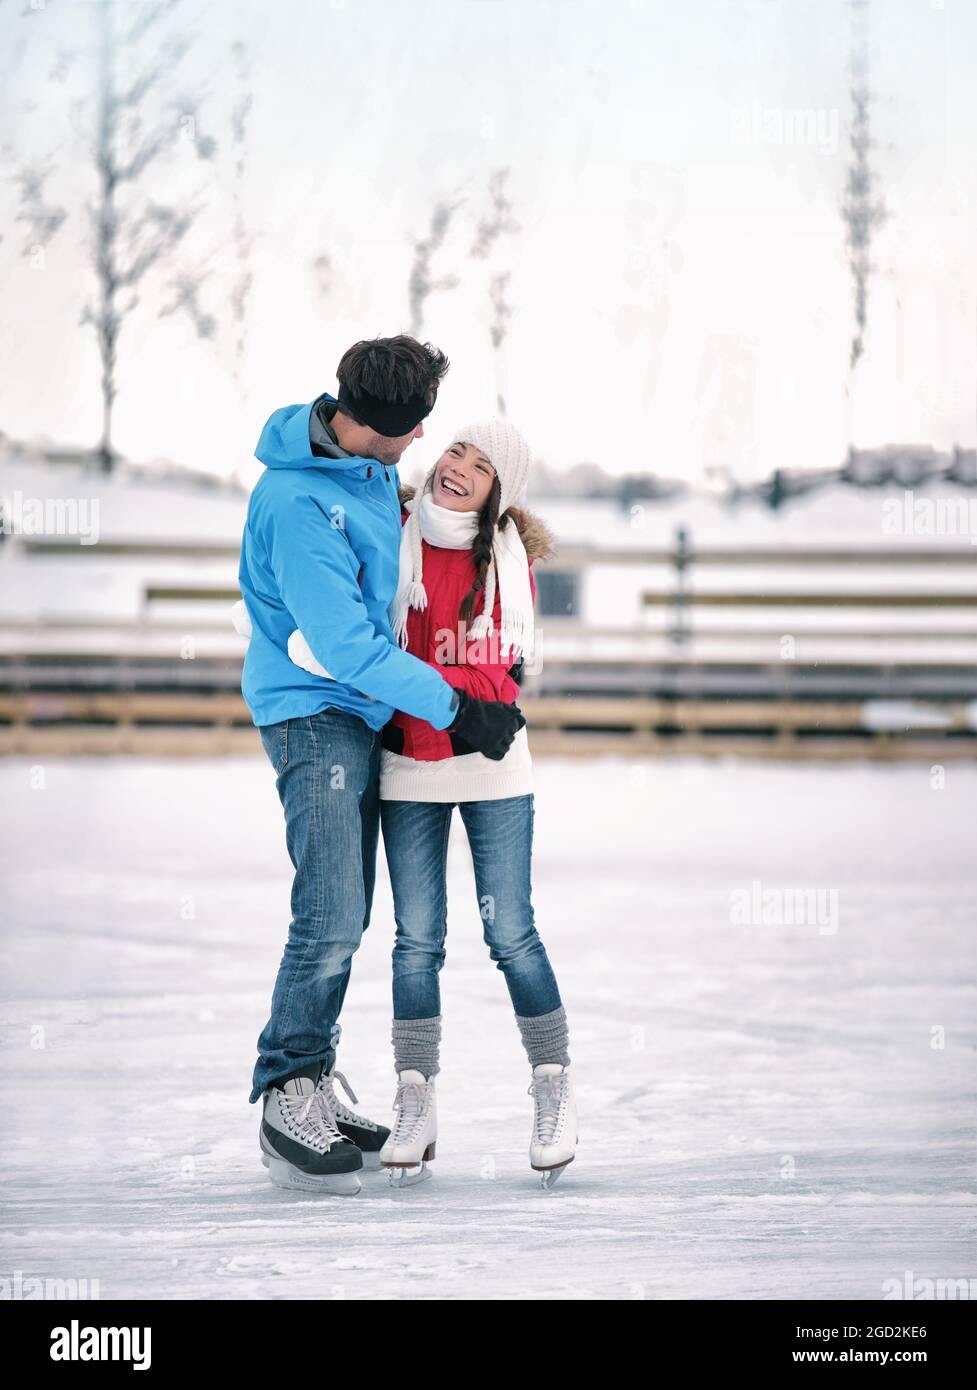 Ice skating winter activity couple in love having fun learning to figure  skate on skating rink with rental skates. Young skaters romantic outdoor  Stock Photo - Alamy